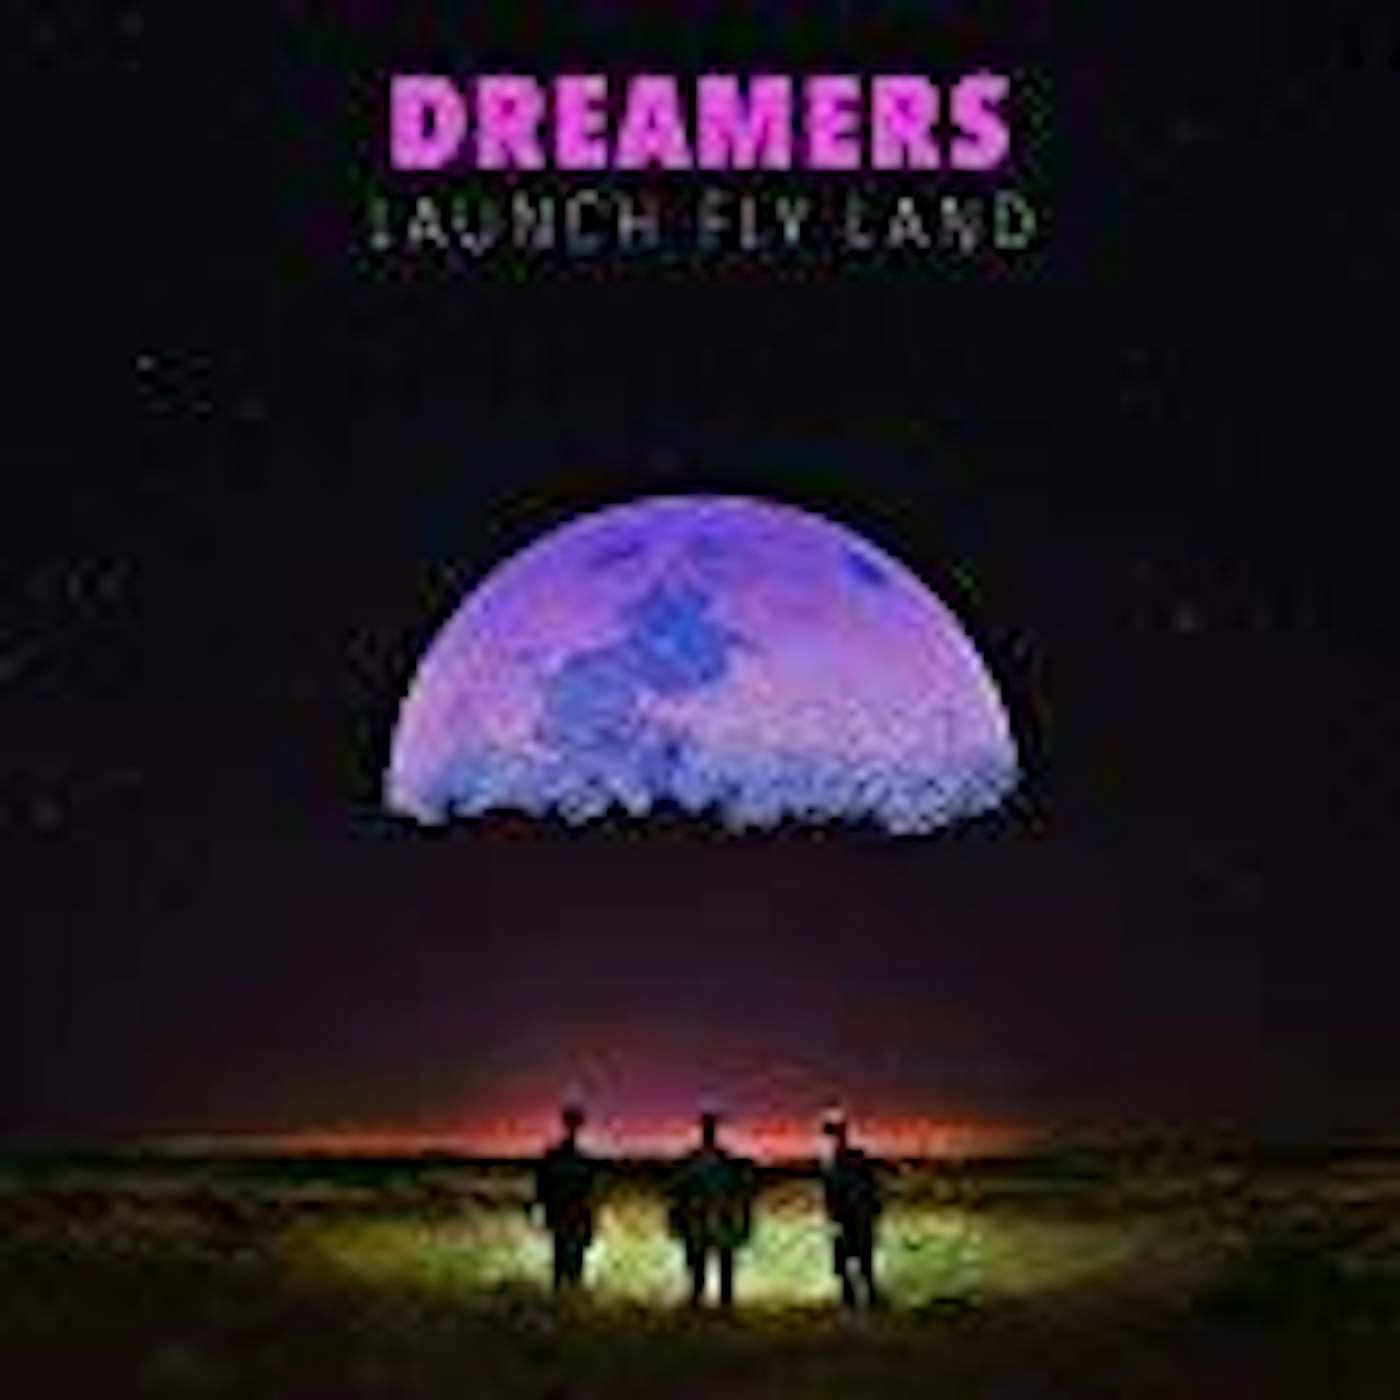 DREAMERS LAUNCH, FLY, LAND CD